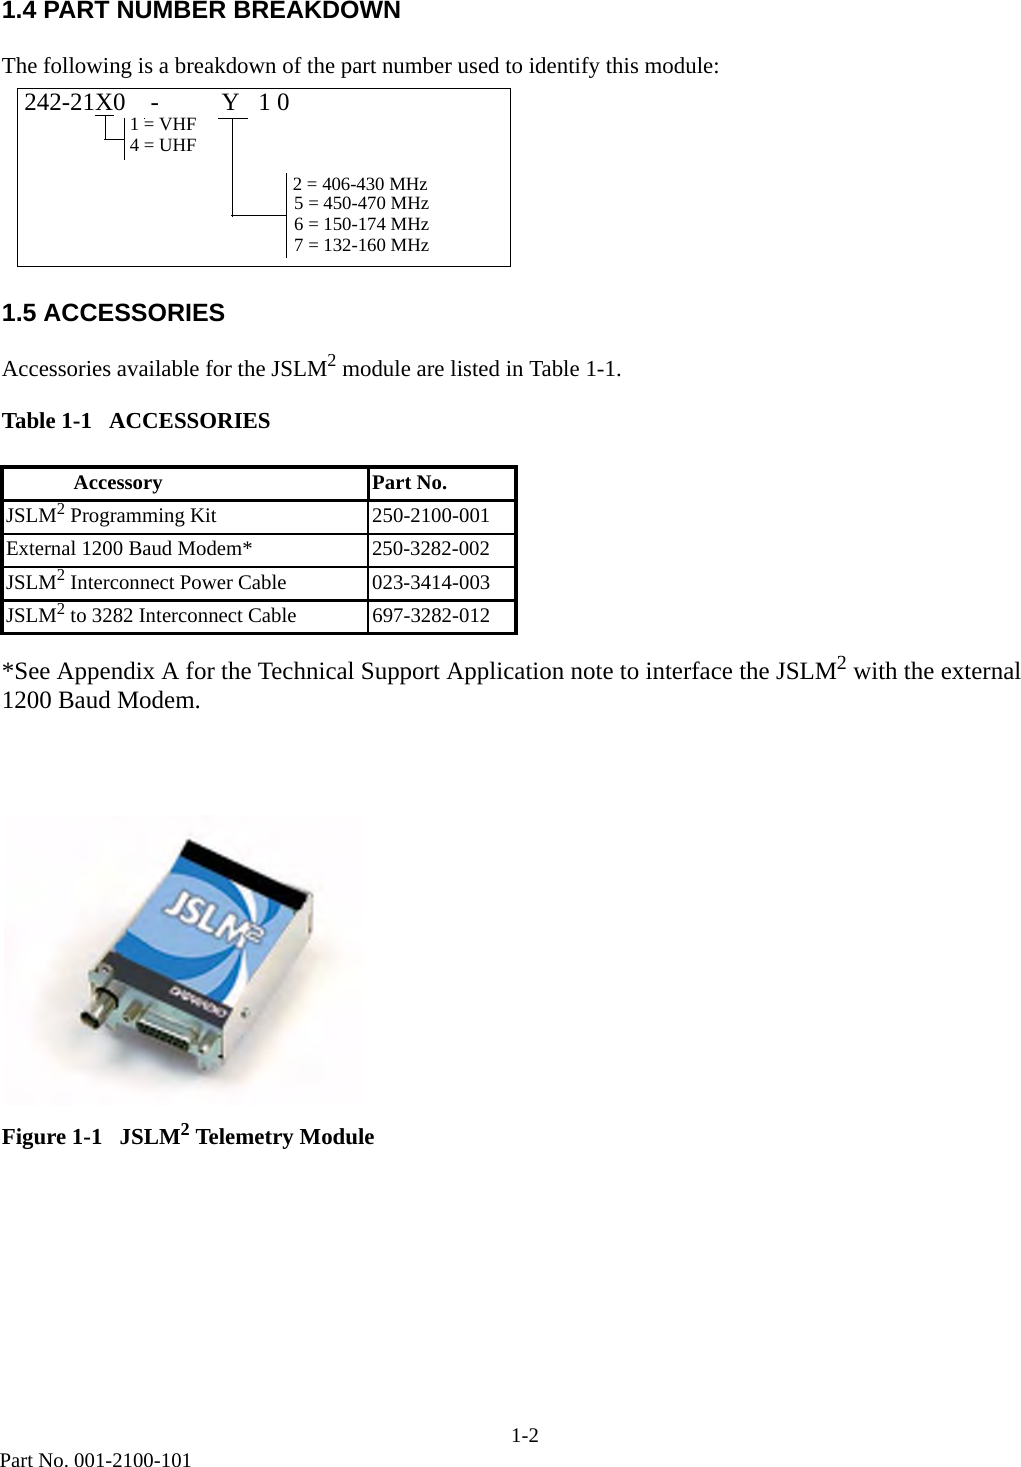 1-2Part No. 001-2100-1011.4 PART NUMBER BREAKDOWNThe following is a breakdown of the part number used to identify this module:1.5 ACCESSORIESAccessories available for the JSLM2 module are listed in Table 1-1.*See Appendix A for the Technical Support Application note to interface the JSLM2 with the external 1200 Baud Modem.Figure 1-1   JSLM2 Telemetry ModuleTable 1-1   ACCESSORIES             Accessory Part No.JSLM2 Programming Kit 250-2100-001External 1200 Baud Modem* 250-3282-002JSLM2 Interconnect Power Cable 023-3414-003JSLM2 to 3282 Interconnect Cable 697-3282-012242-21X0    -          Y   1 07 = 132-160 MHz 6 = 150-174 MHz5 = 450-470 MHz2 = 406-430 MHz1 = VHF4 = UHF